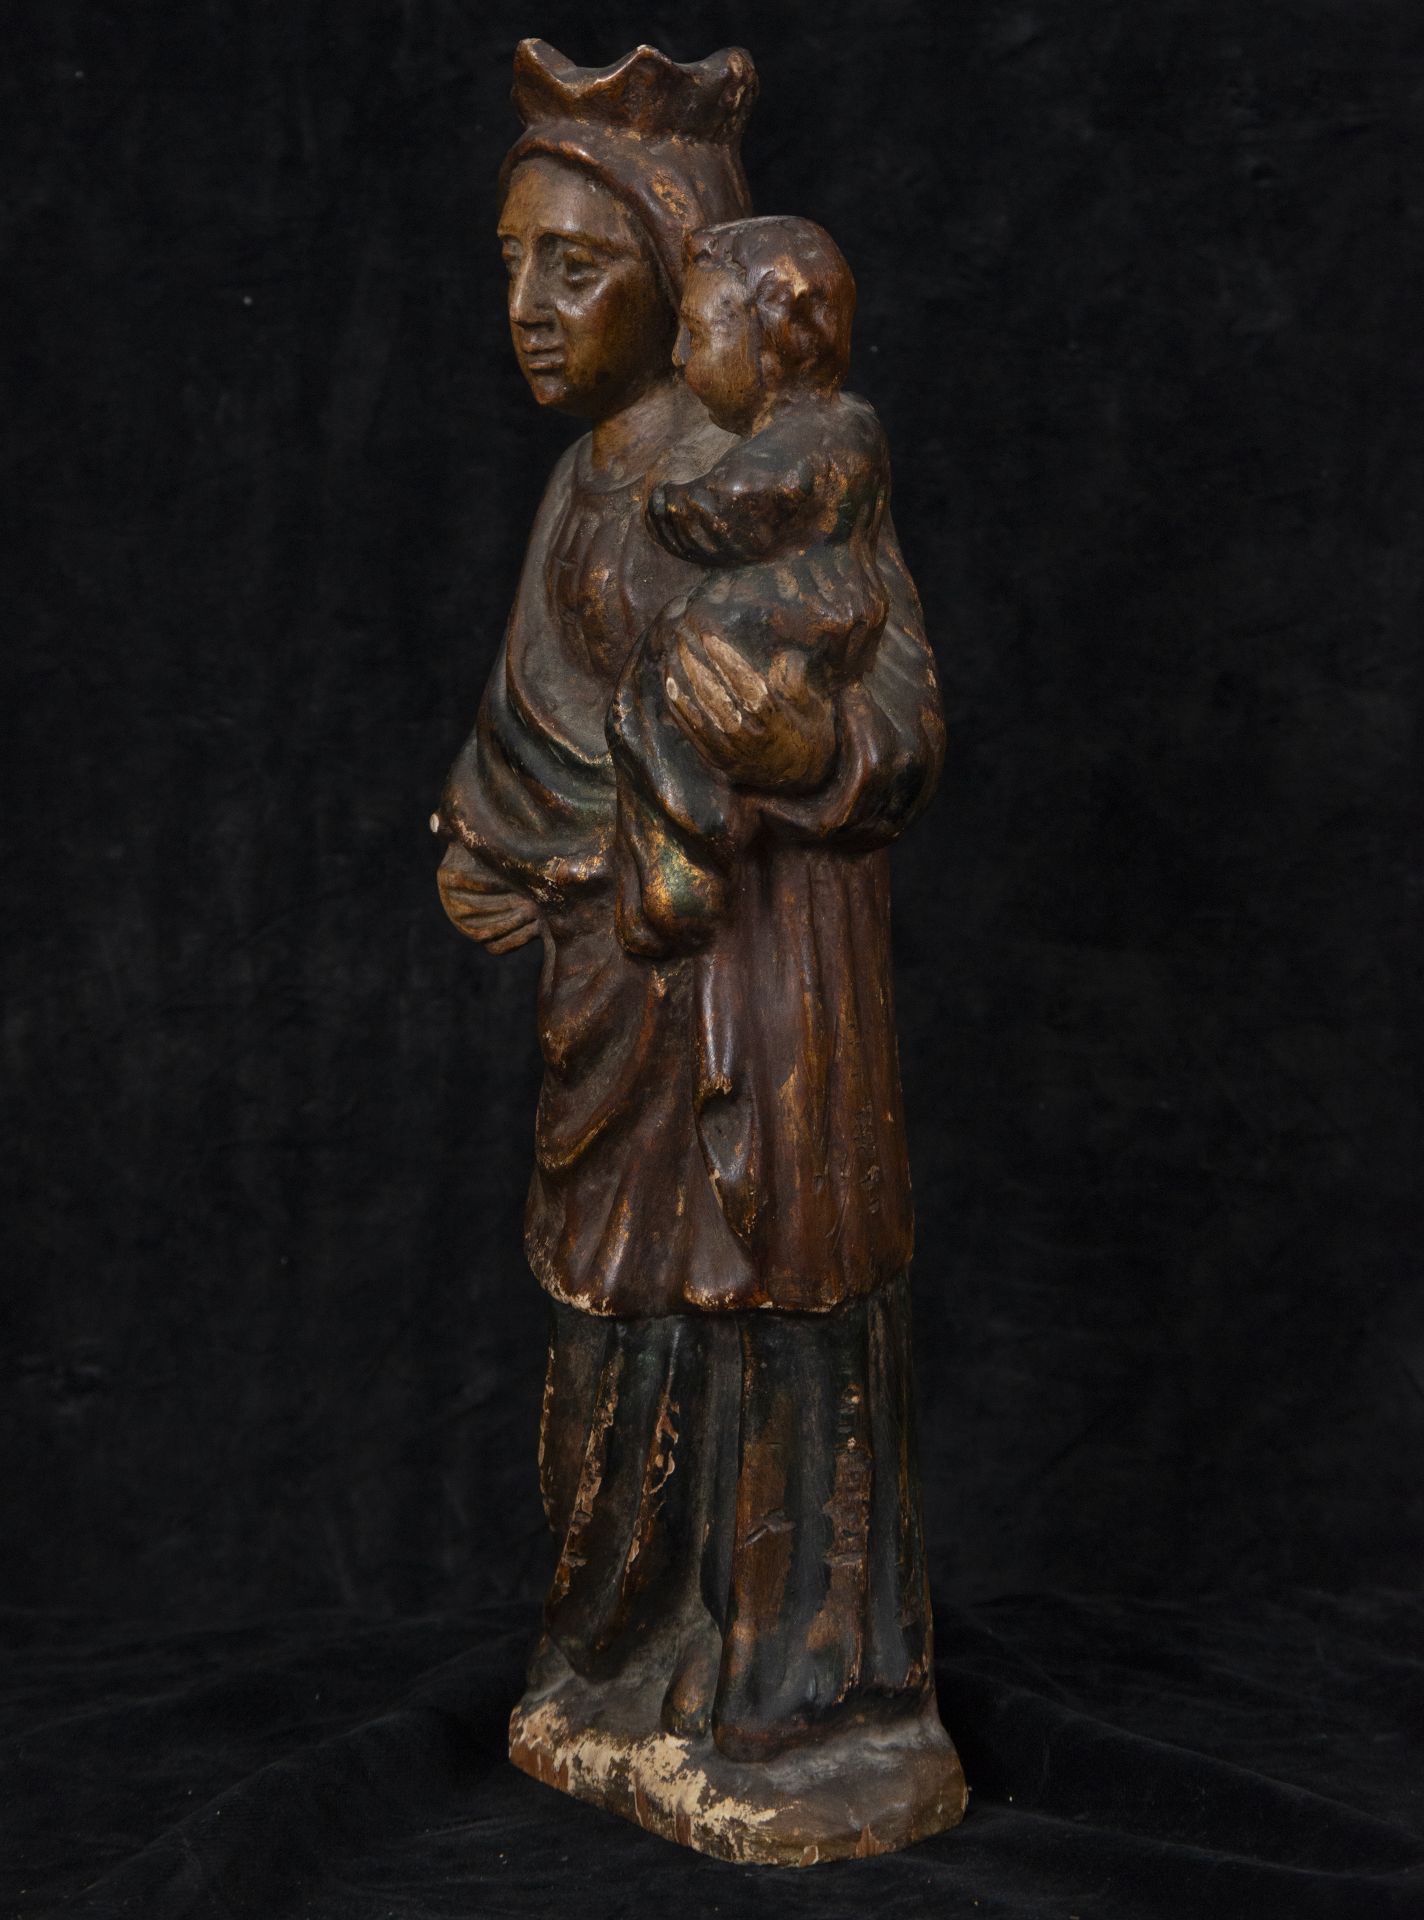 Exquisite Virgin and Child, possibly 17th century French Burgundy school - Image 4 of 7